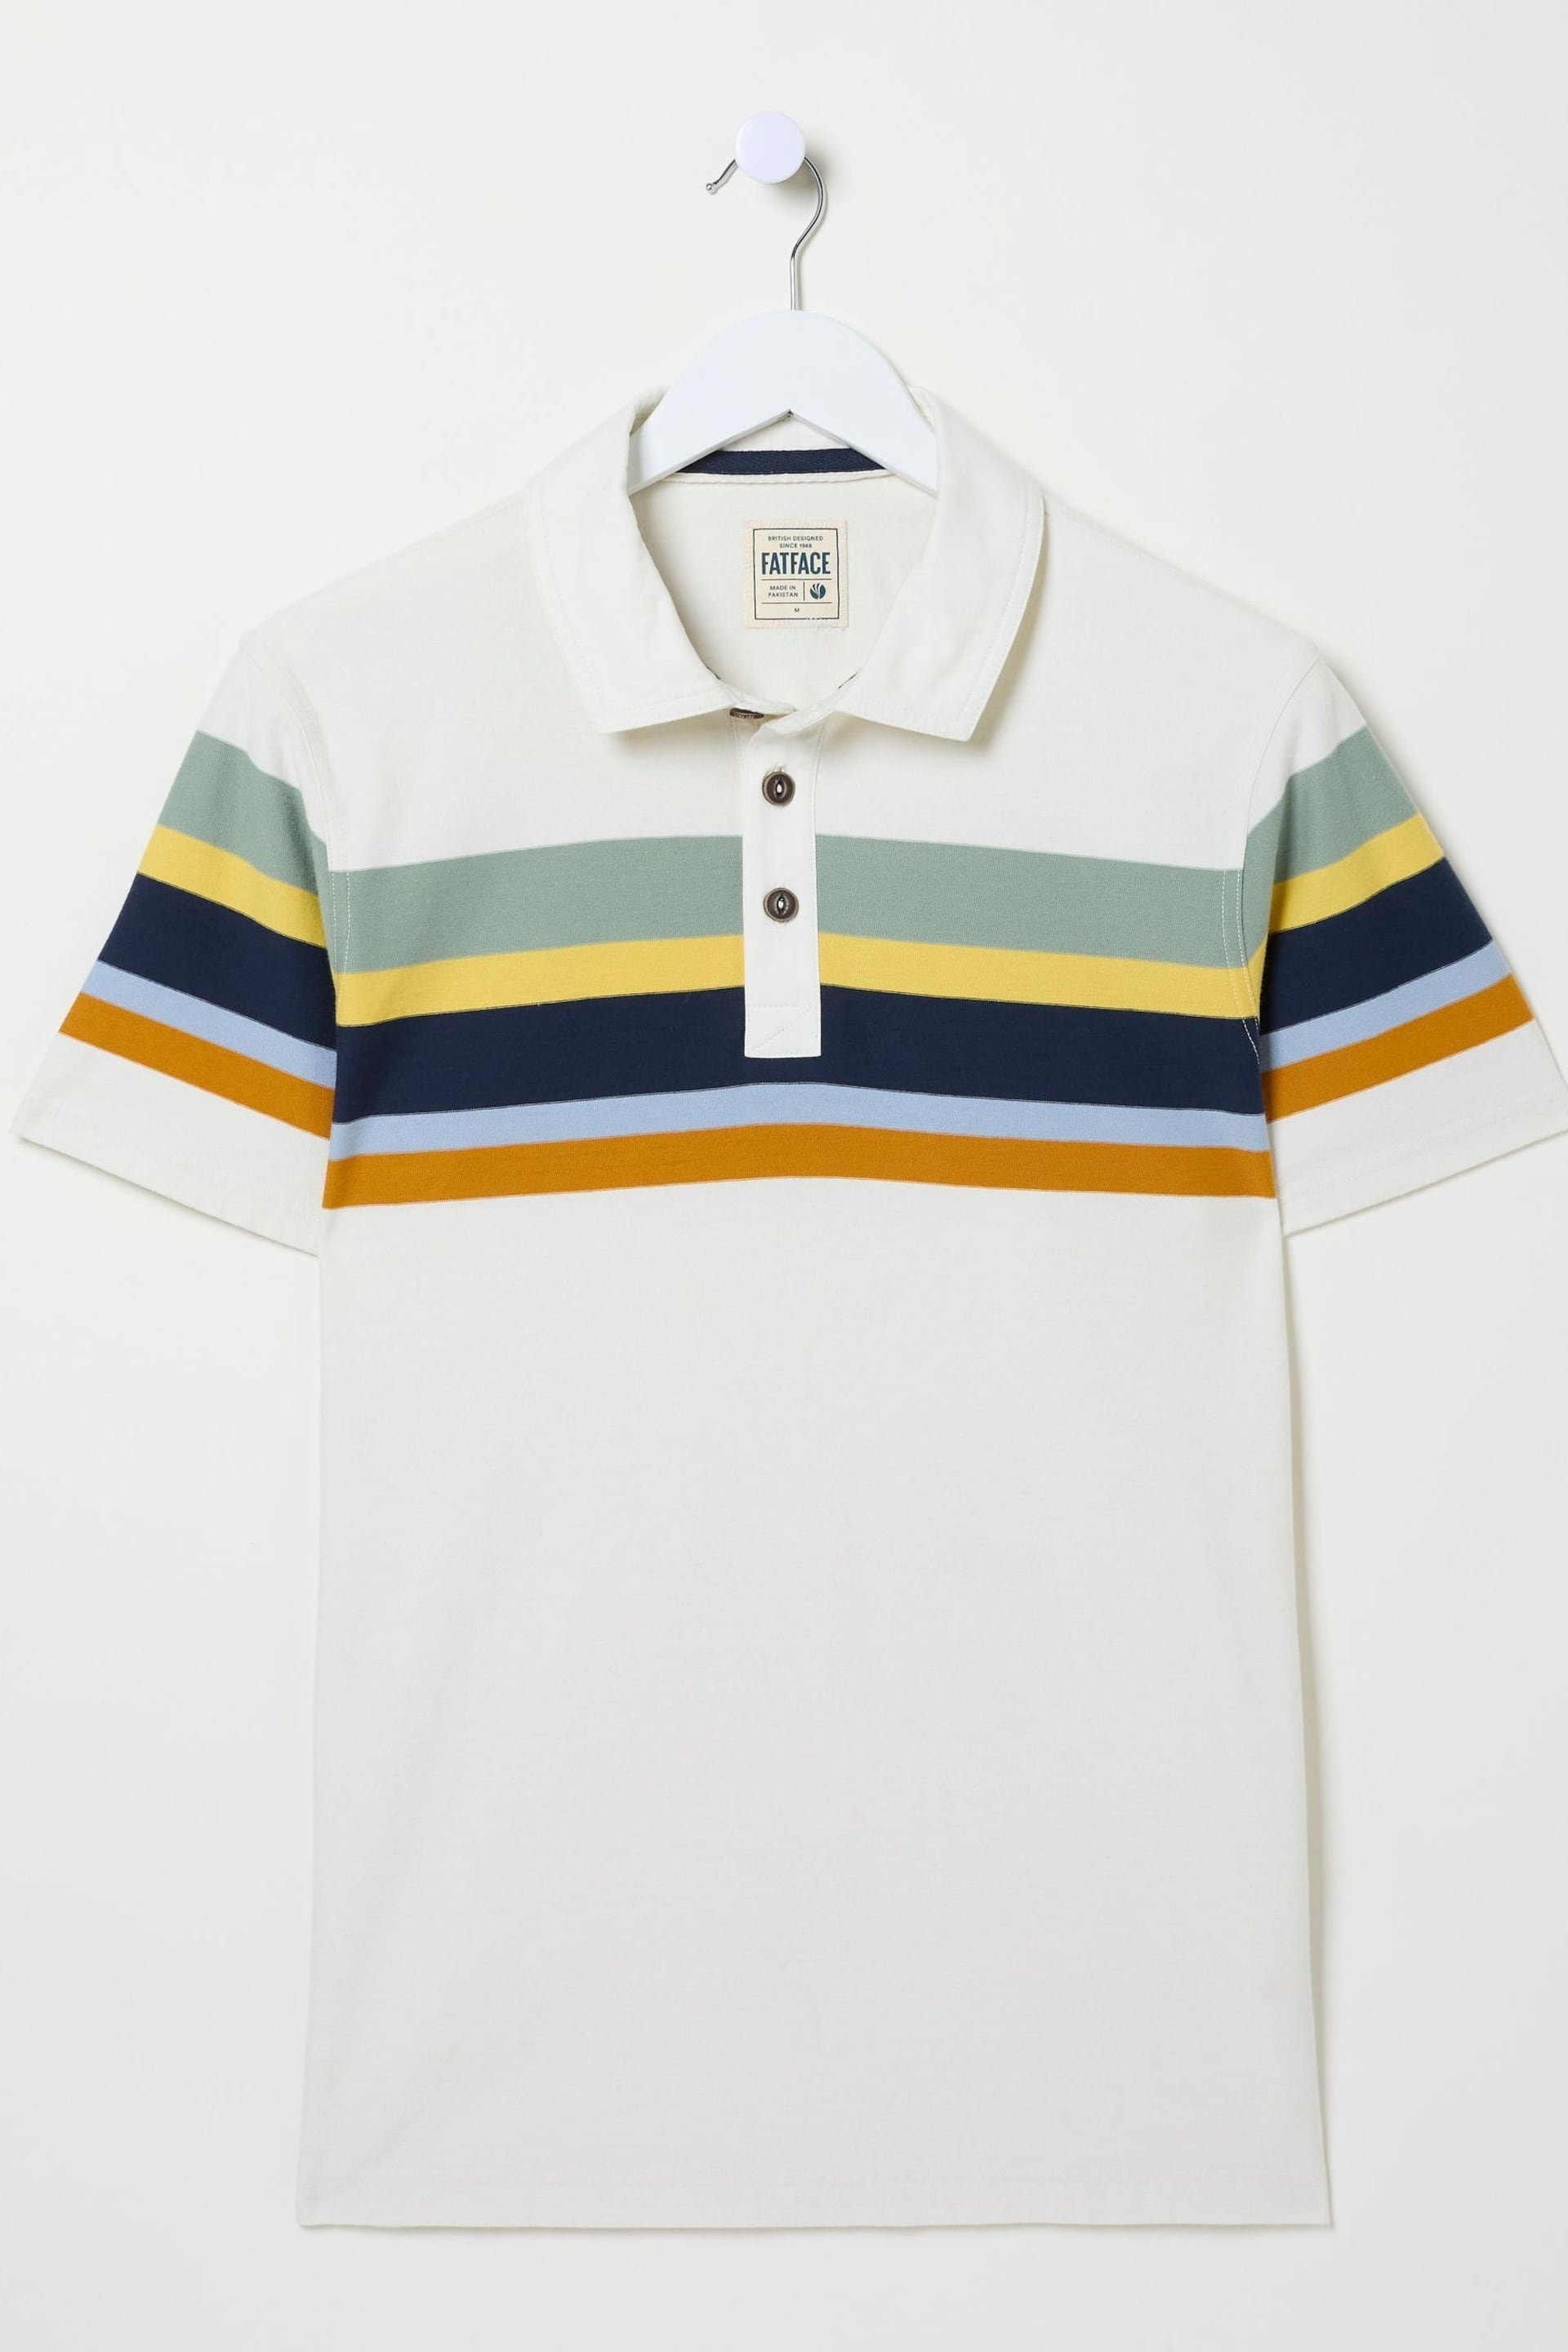 FatFace Natural Perranporth Chest Stripe Polo Shirt - Image 4 of 4